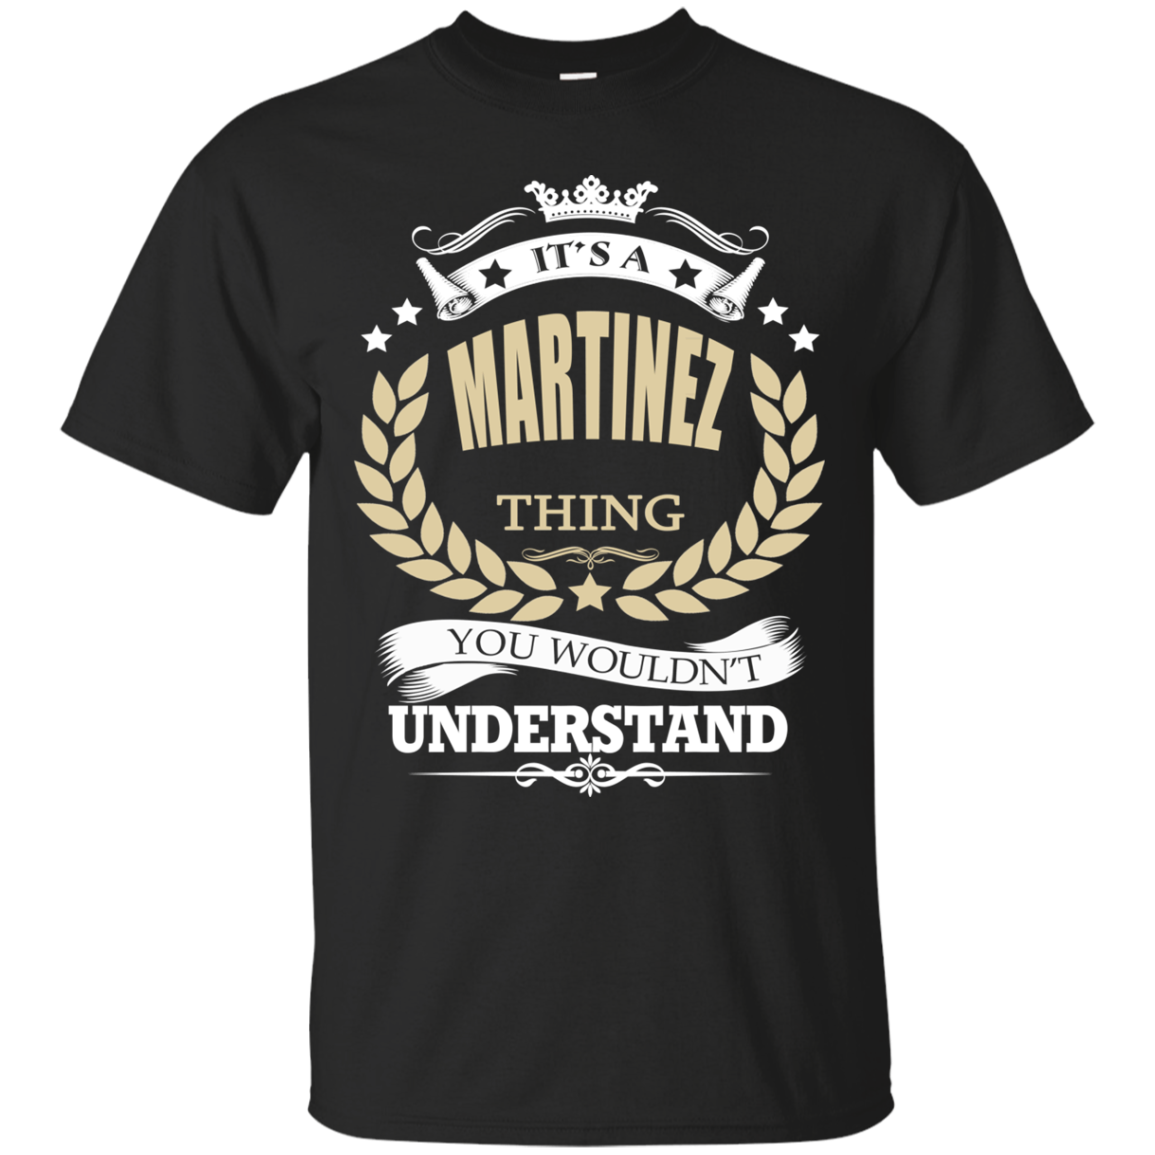 Martinez Shirts It's A Martinez Thing You Wouldn't Understand - Teesmiley